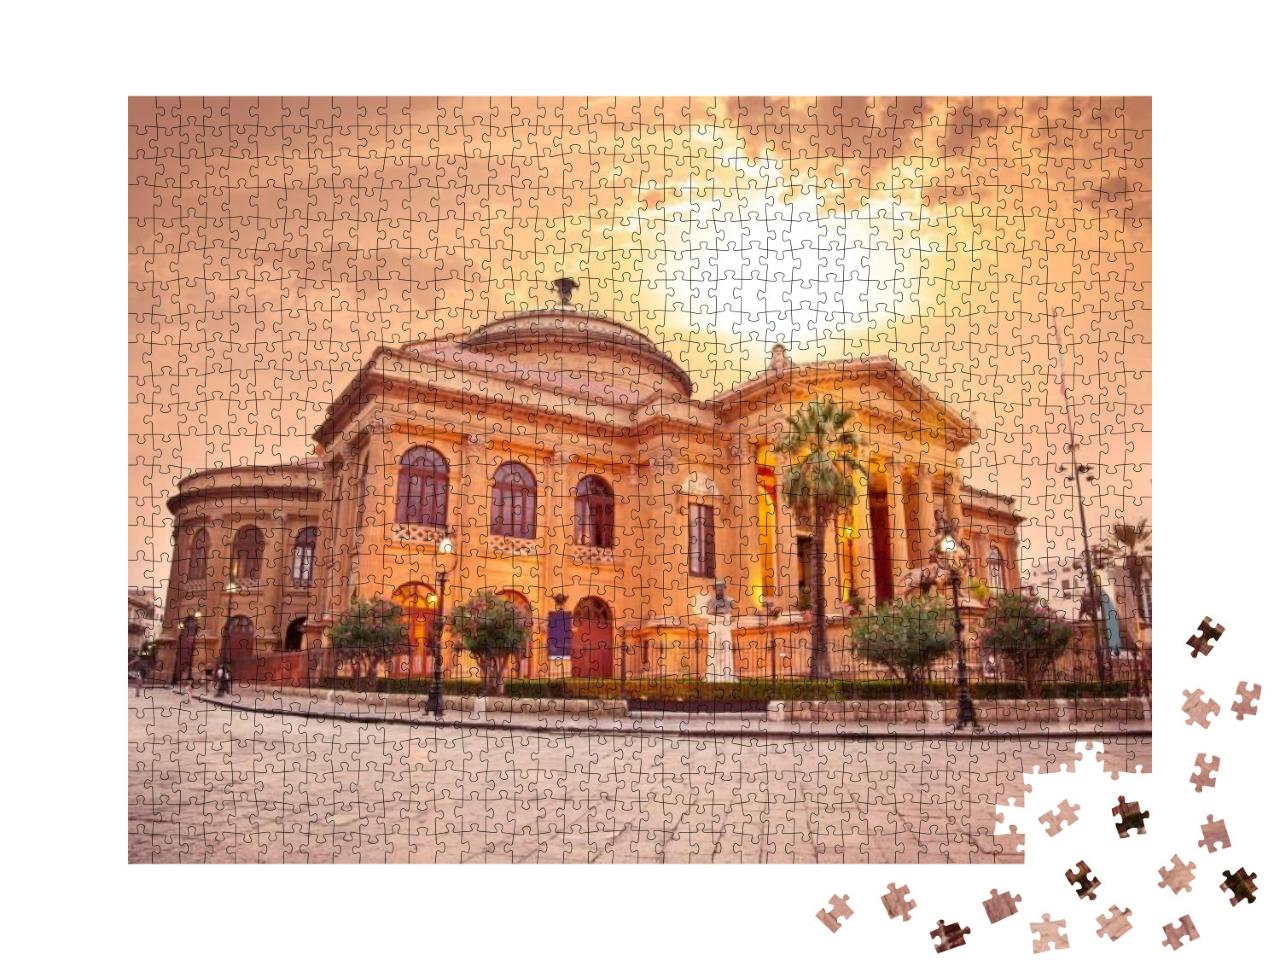 Puzzle 1000 Teile „Teatro Massimo, Opernhaus in Palermo, Sizilien“